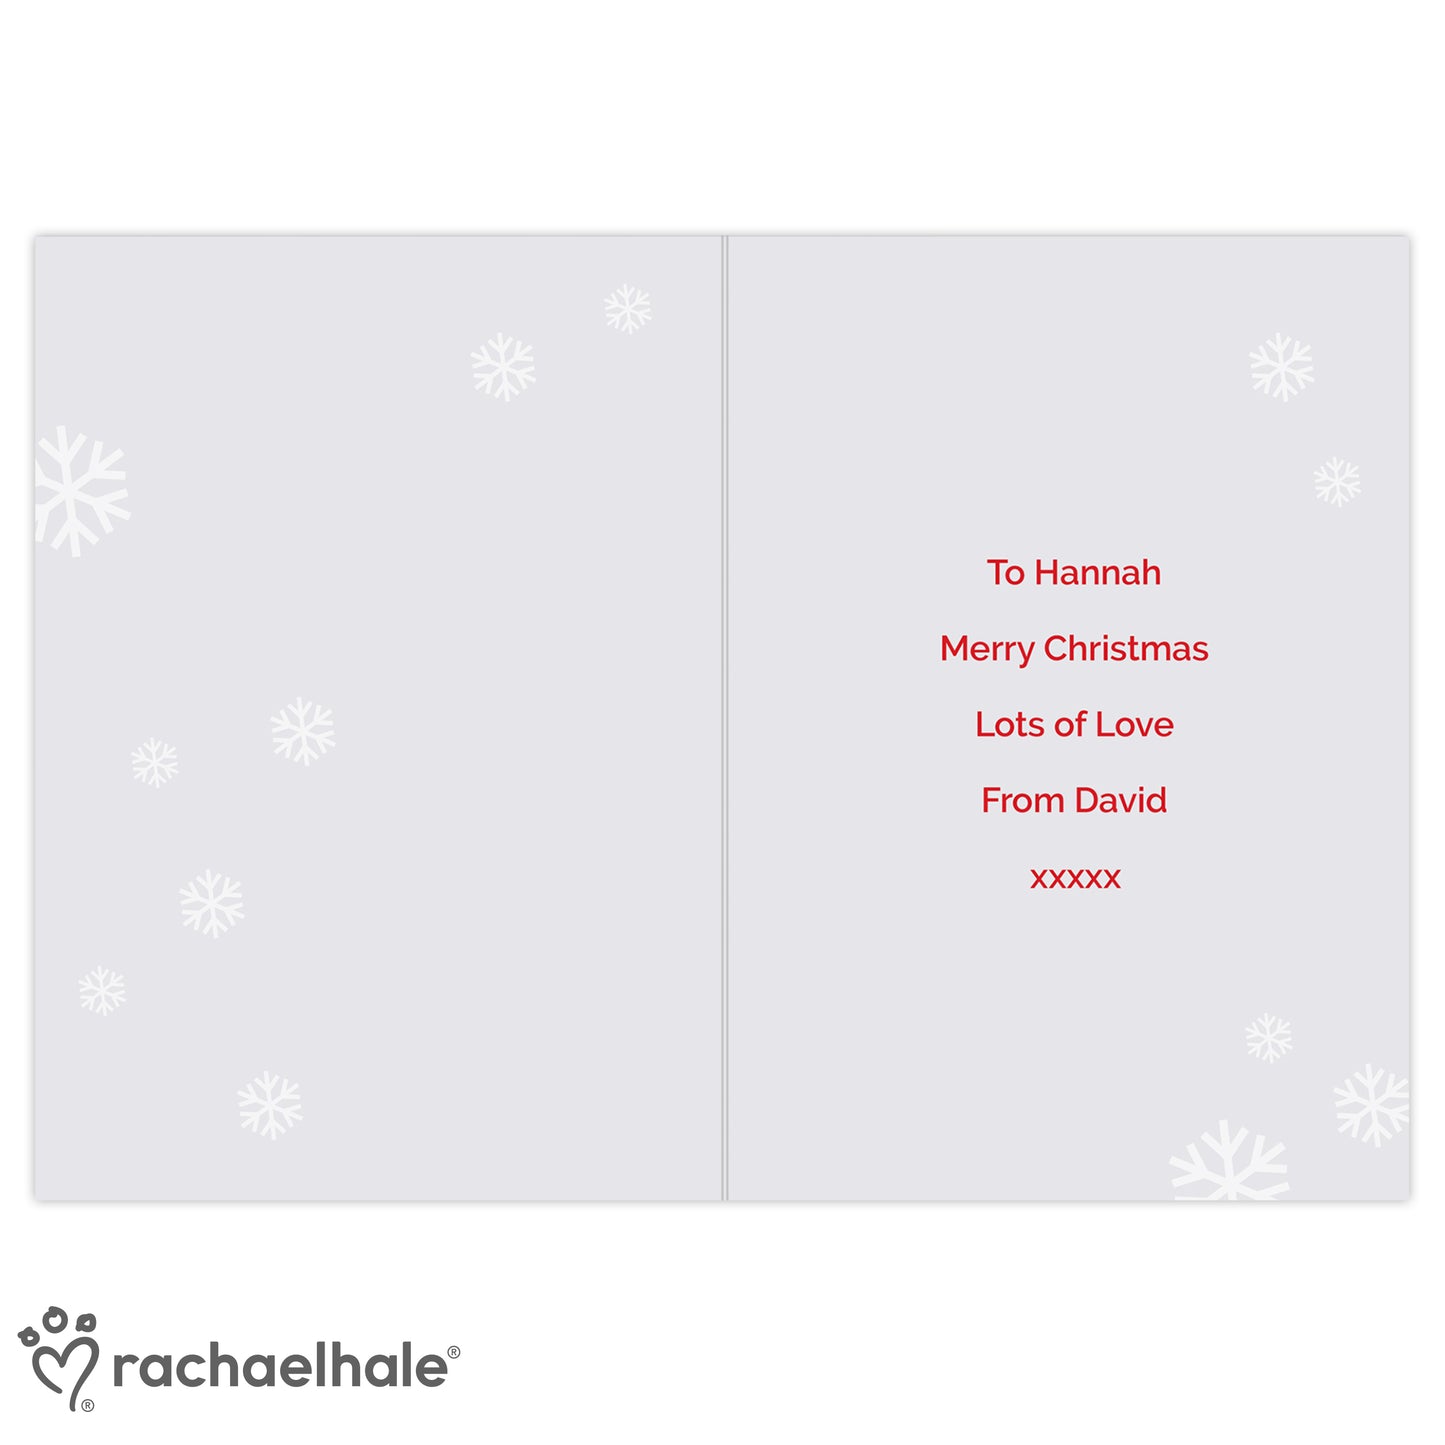 Personalised Rachael Hale Christmas Dachshund Through the Snow Card Add Any Name - Personalise It!